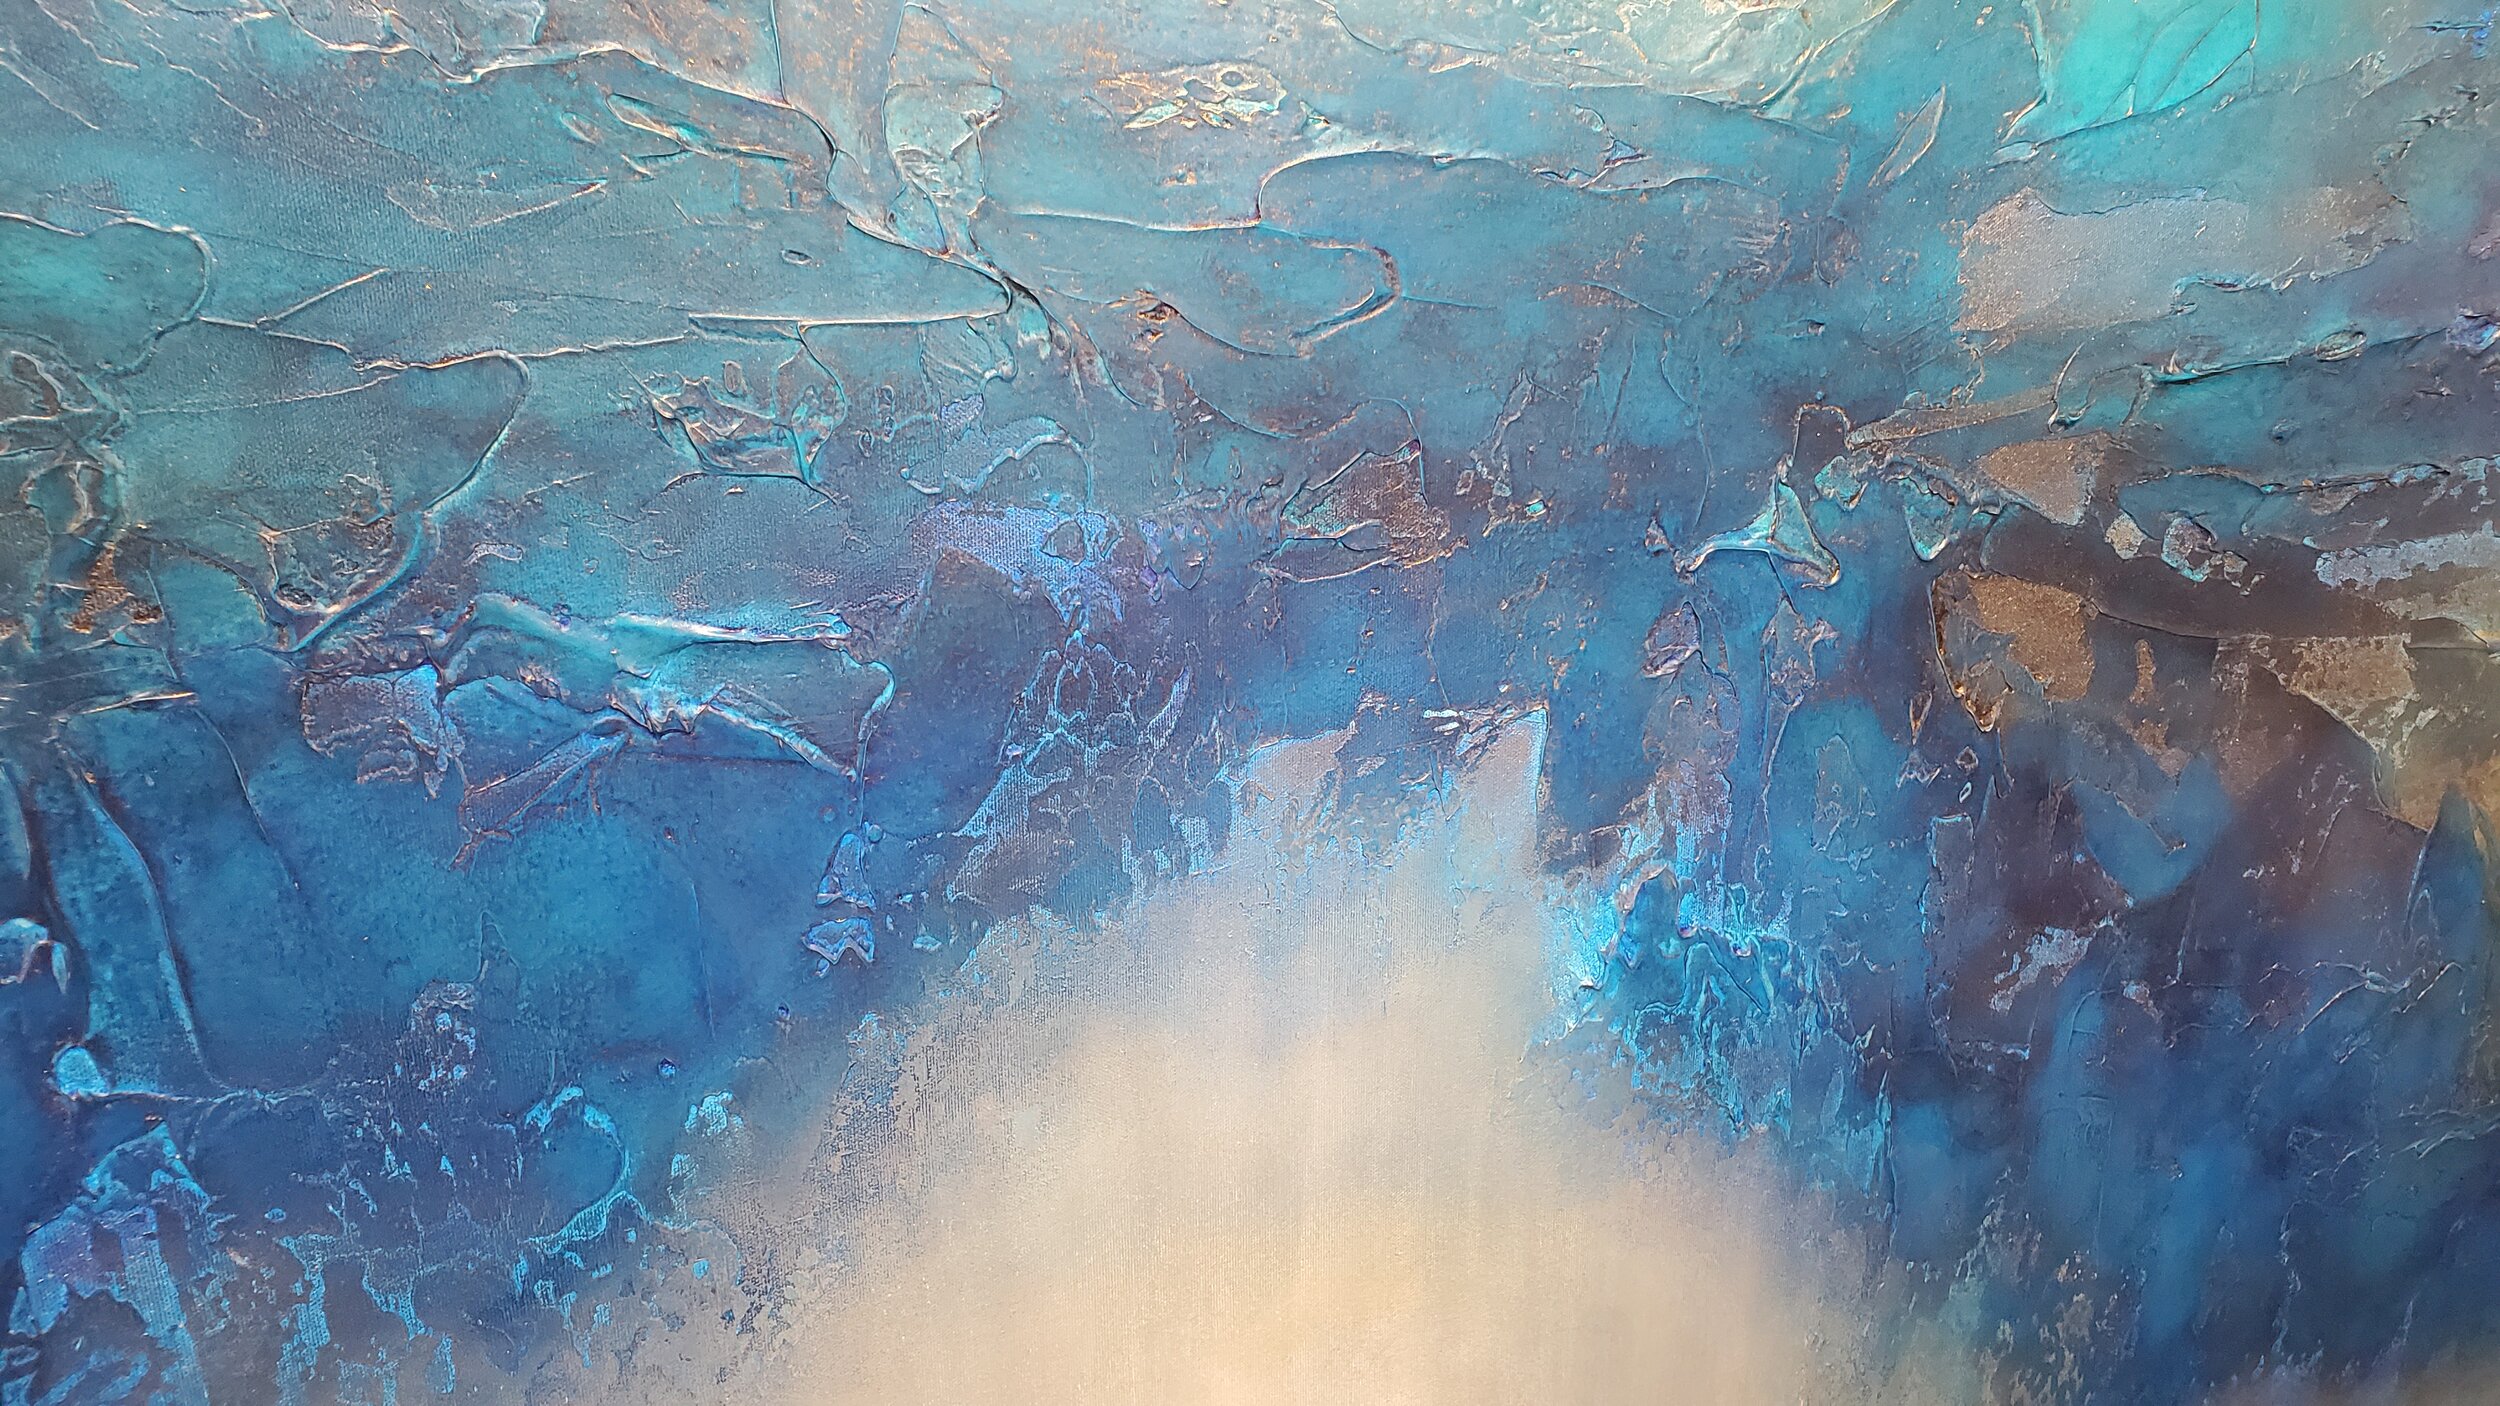  Painting #2 Unknown- Vancouver abstract painter, Donna Giraud has eleven new available artworks for sale in her 2020 solo art exhibition titled, Lost and Found. Her large scale, abstract, textural artworks are perfect for any interior design aesthet